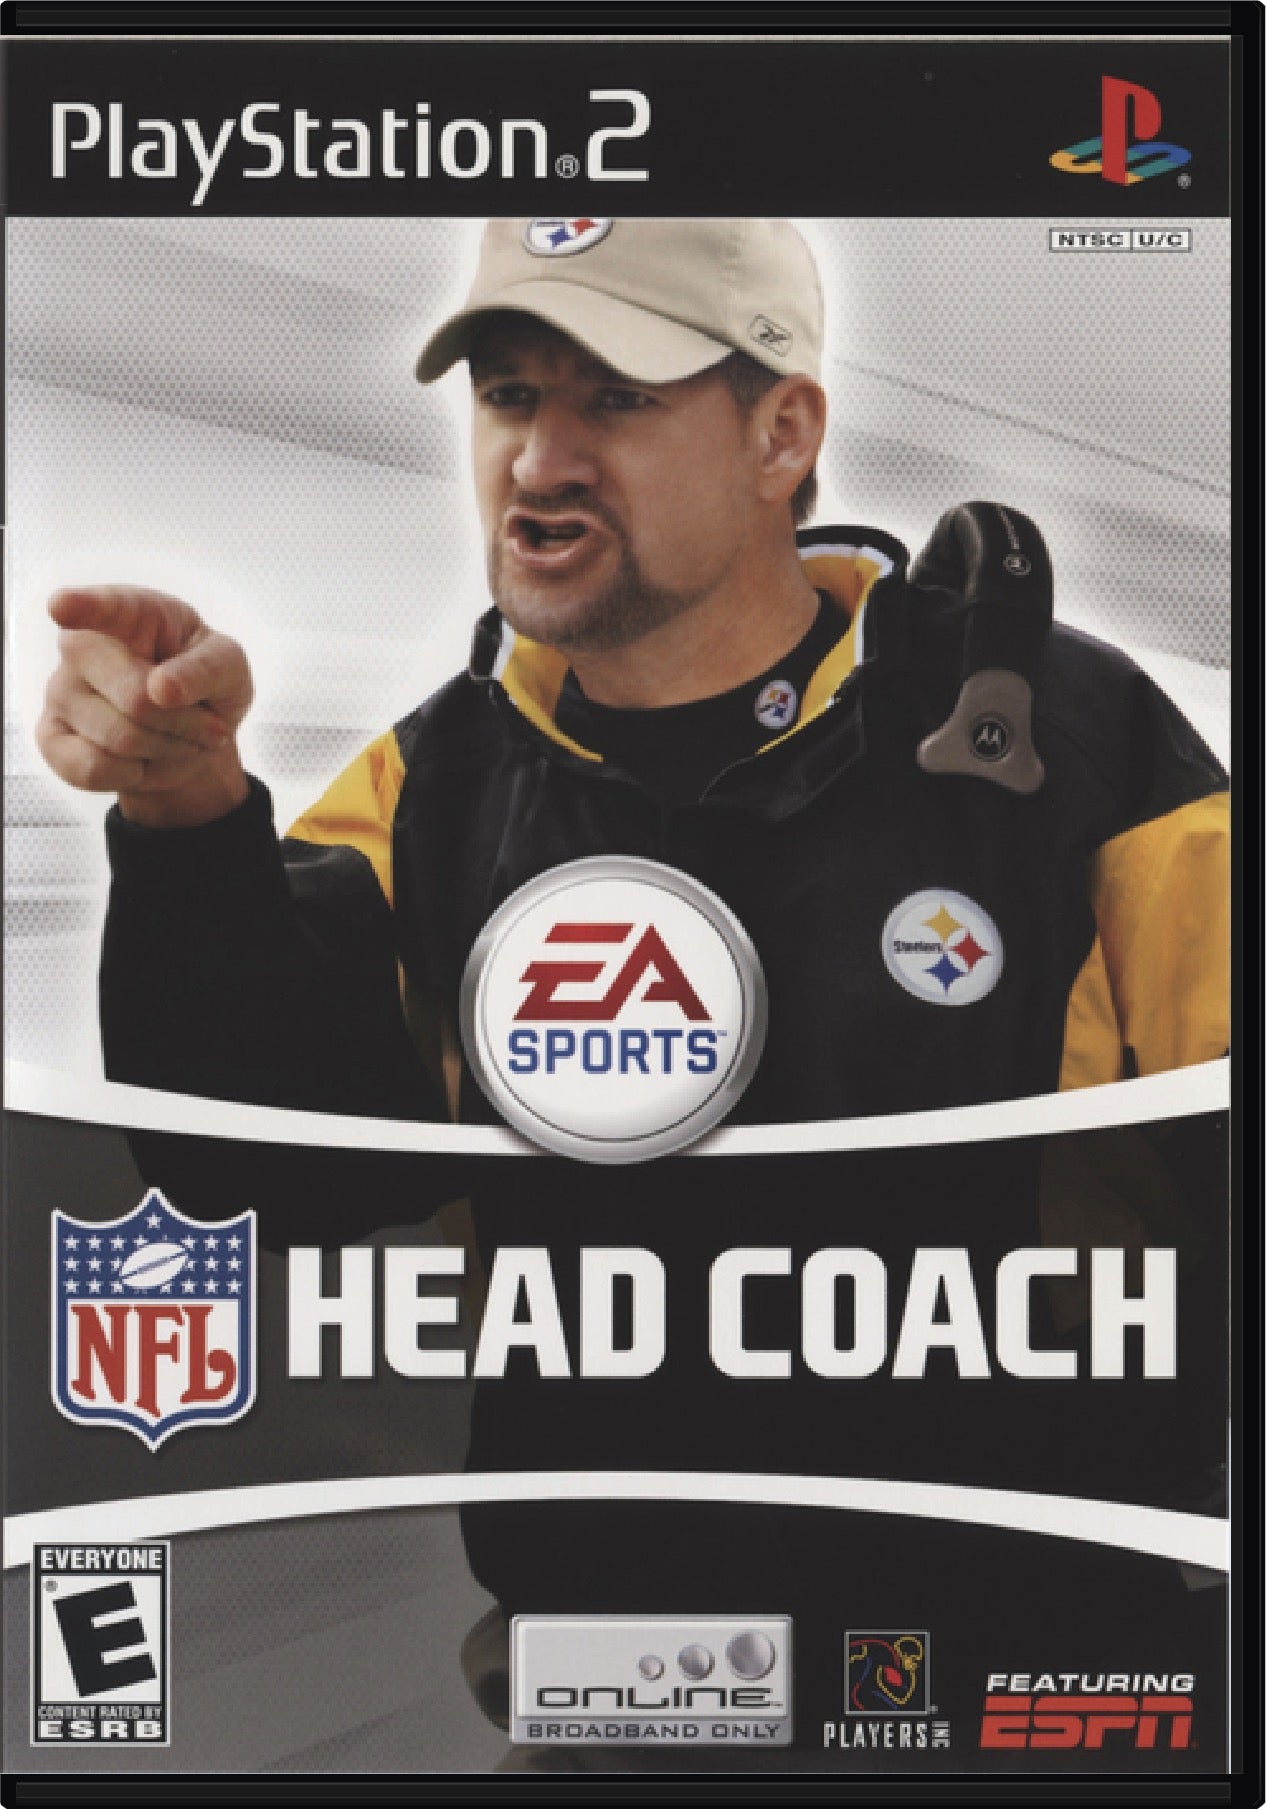 NFL Head Coach Cover Art and Product Photo